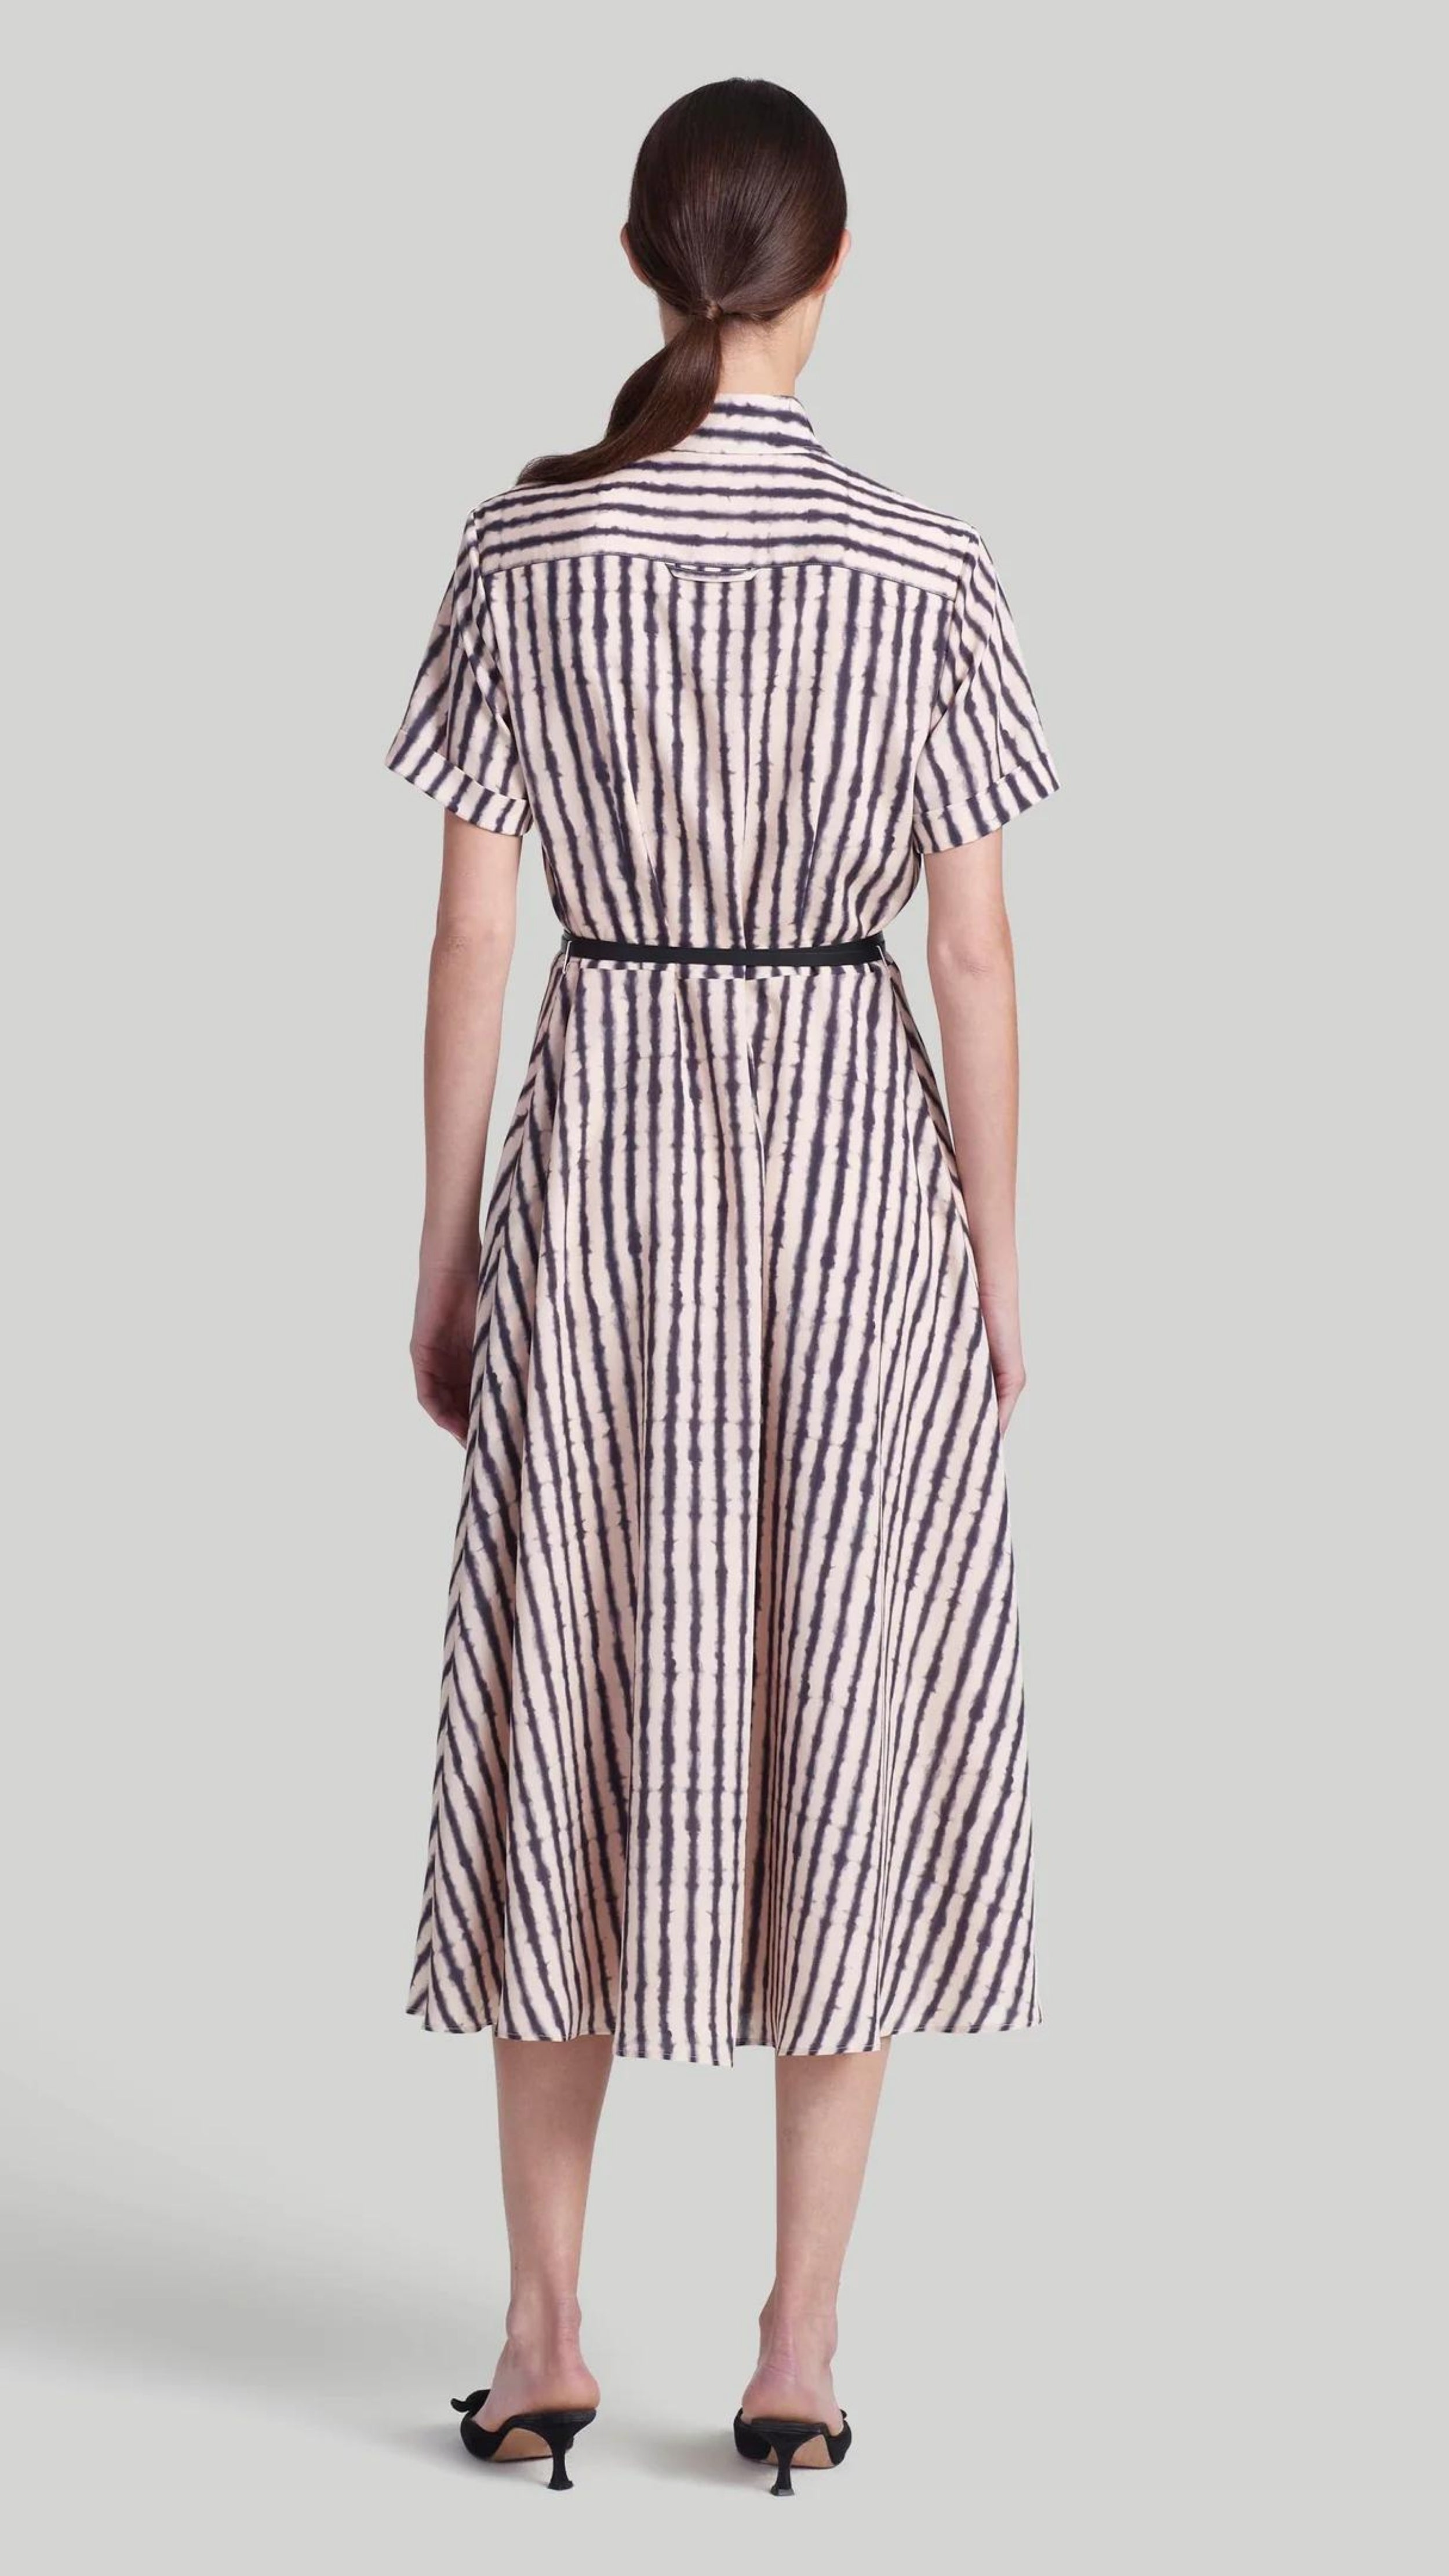 Altuzarra Kiera Dress The 'Kiera' dress is designed with a small point collar, short sleeves and a flattering A-line skirt. It is detailed with a slim leather waist belt and features a black and white stripe pattern and a front breast pocket. Shown on model facing back.